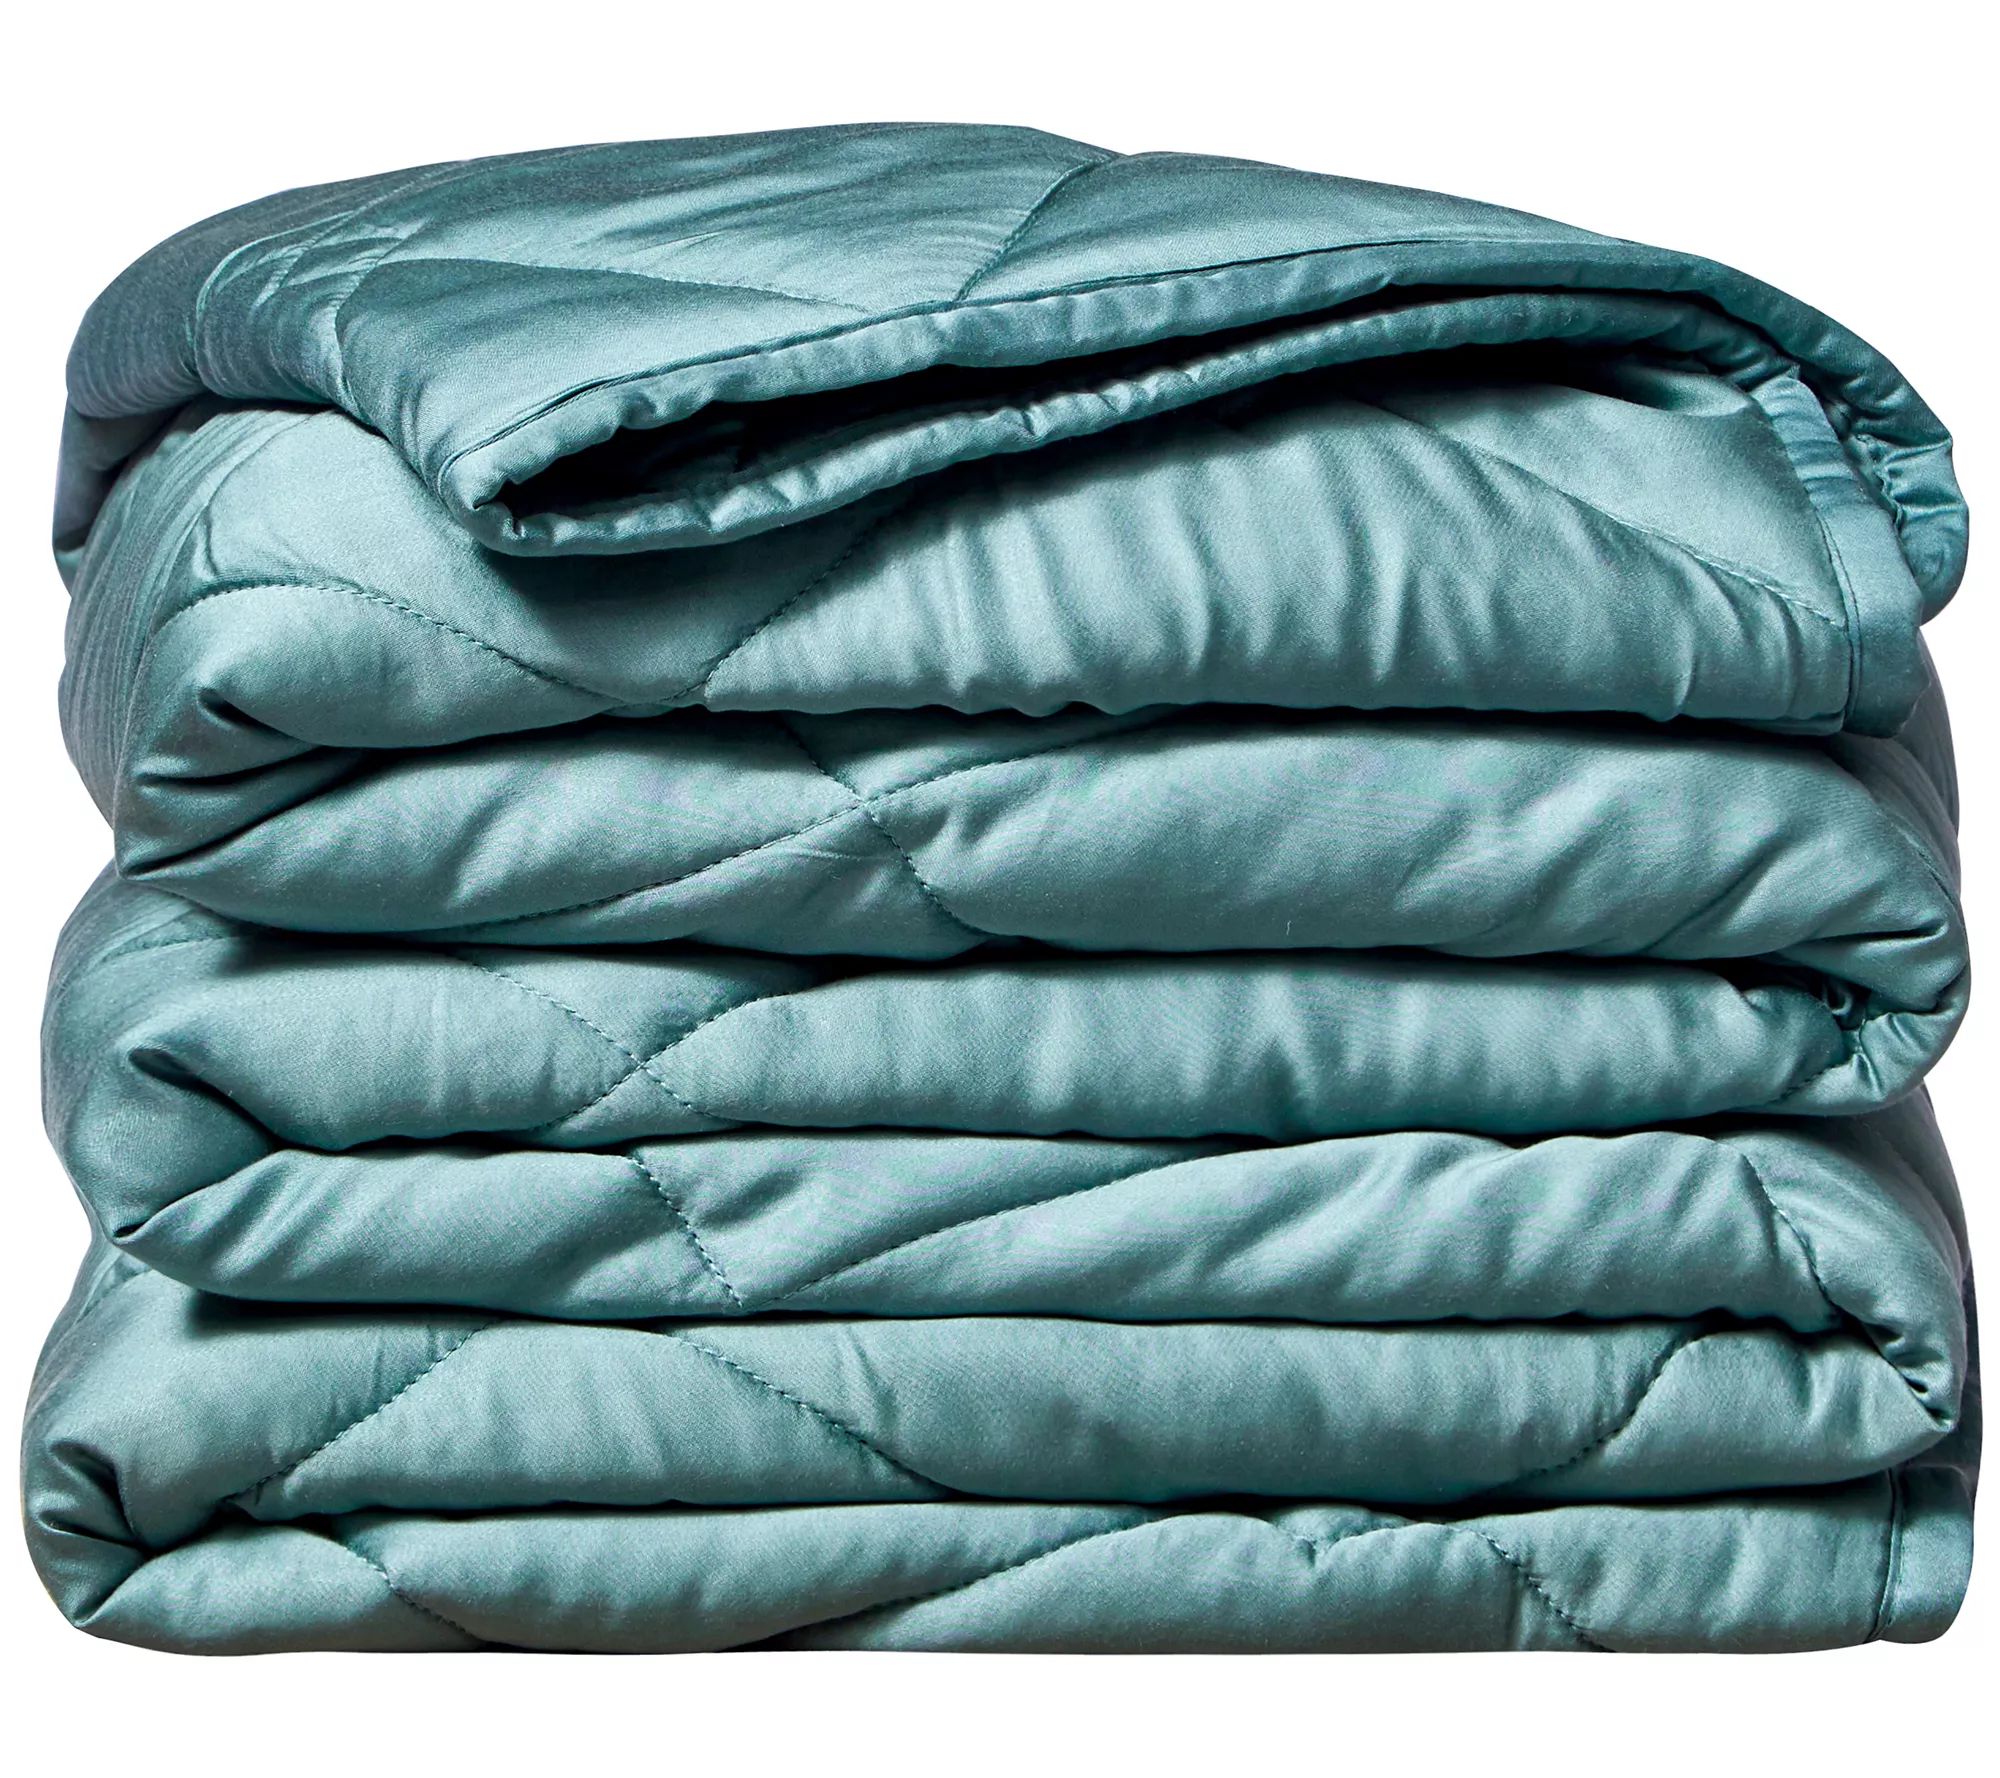 Rejuve 12 lb Weighted Throw Blanket | QVC